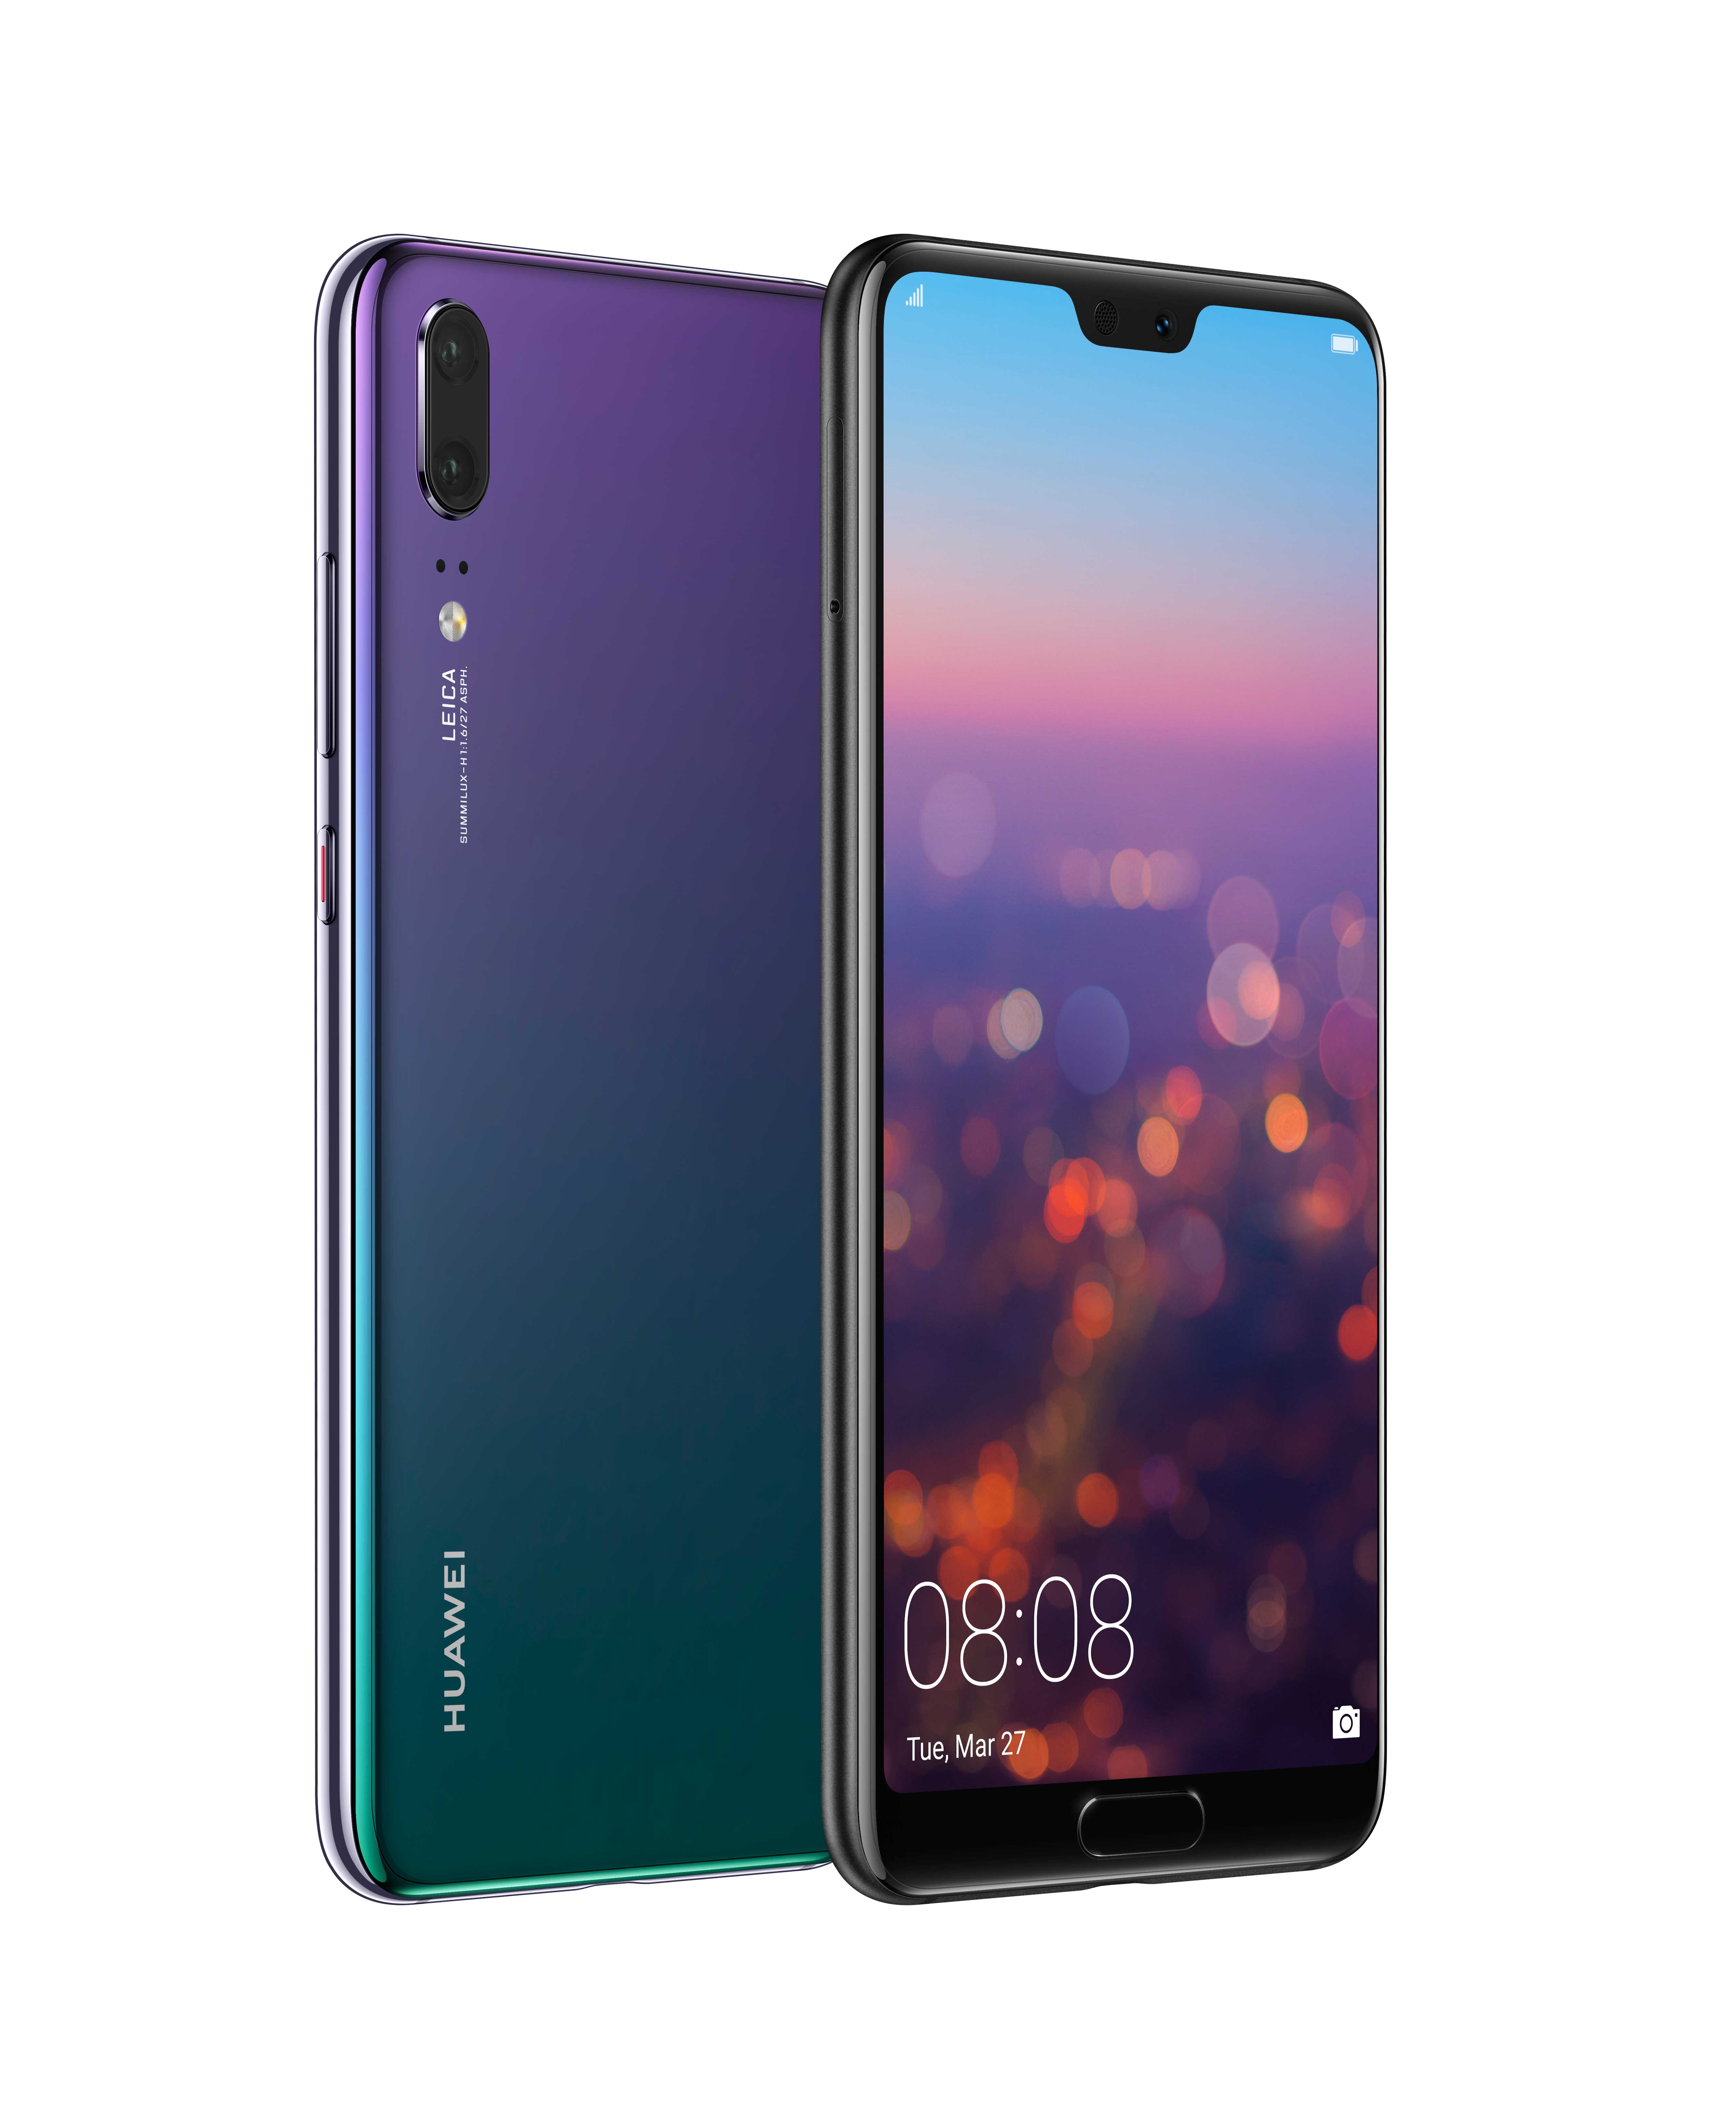 Huawei P20 Pro vs Huawei P40 Pro Mobile Comparison - Compare Huawei P20 Pro vs Huawei P40 Pro Price in India, Camera, Size and other specifications at Gadgets Now Huawei Mate 40 PRO Plus.Coolpad Cool 6.Vivo Y73s 5G.Xiaomi Redmi K30T 5G GB 8GB RAM.Xiaomi Redmi K30T 5G.Oppo A73 5G.Realme Q2 Pro.Realme Q2 Pro GB 8GB RAM.